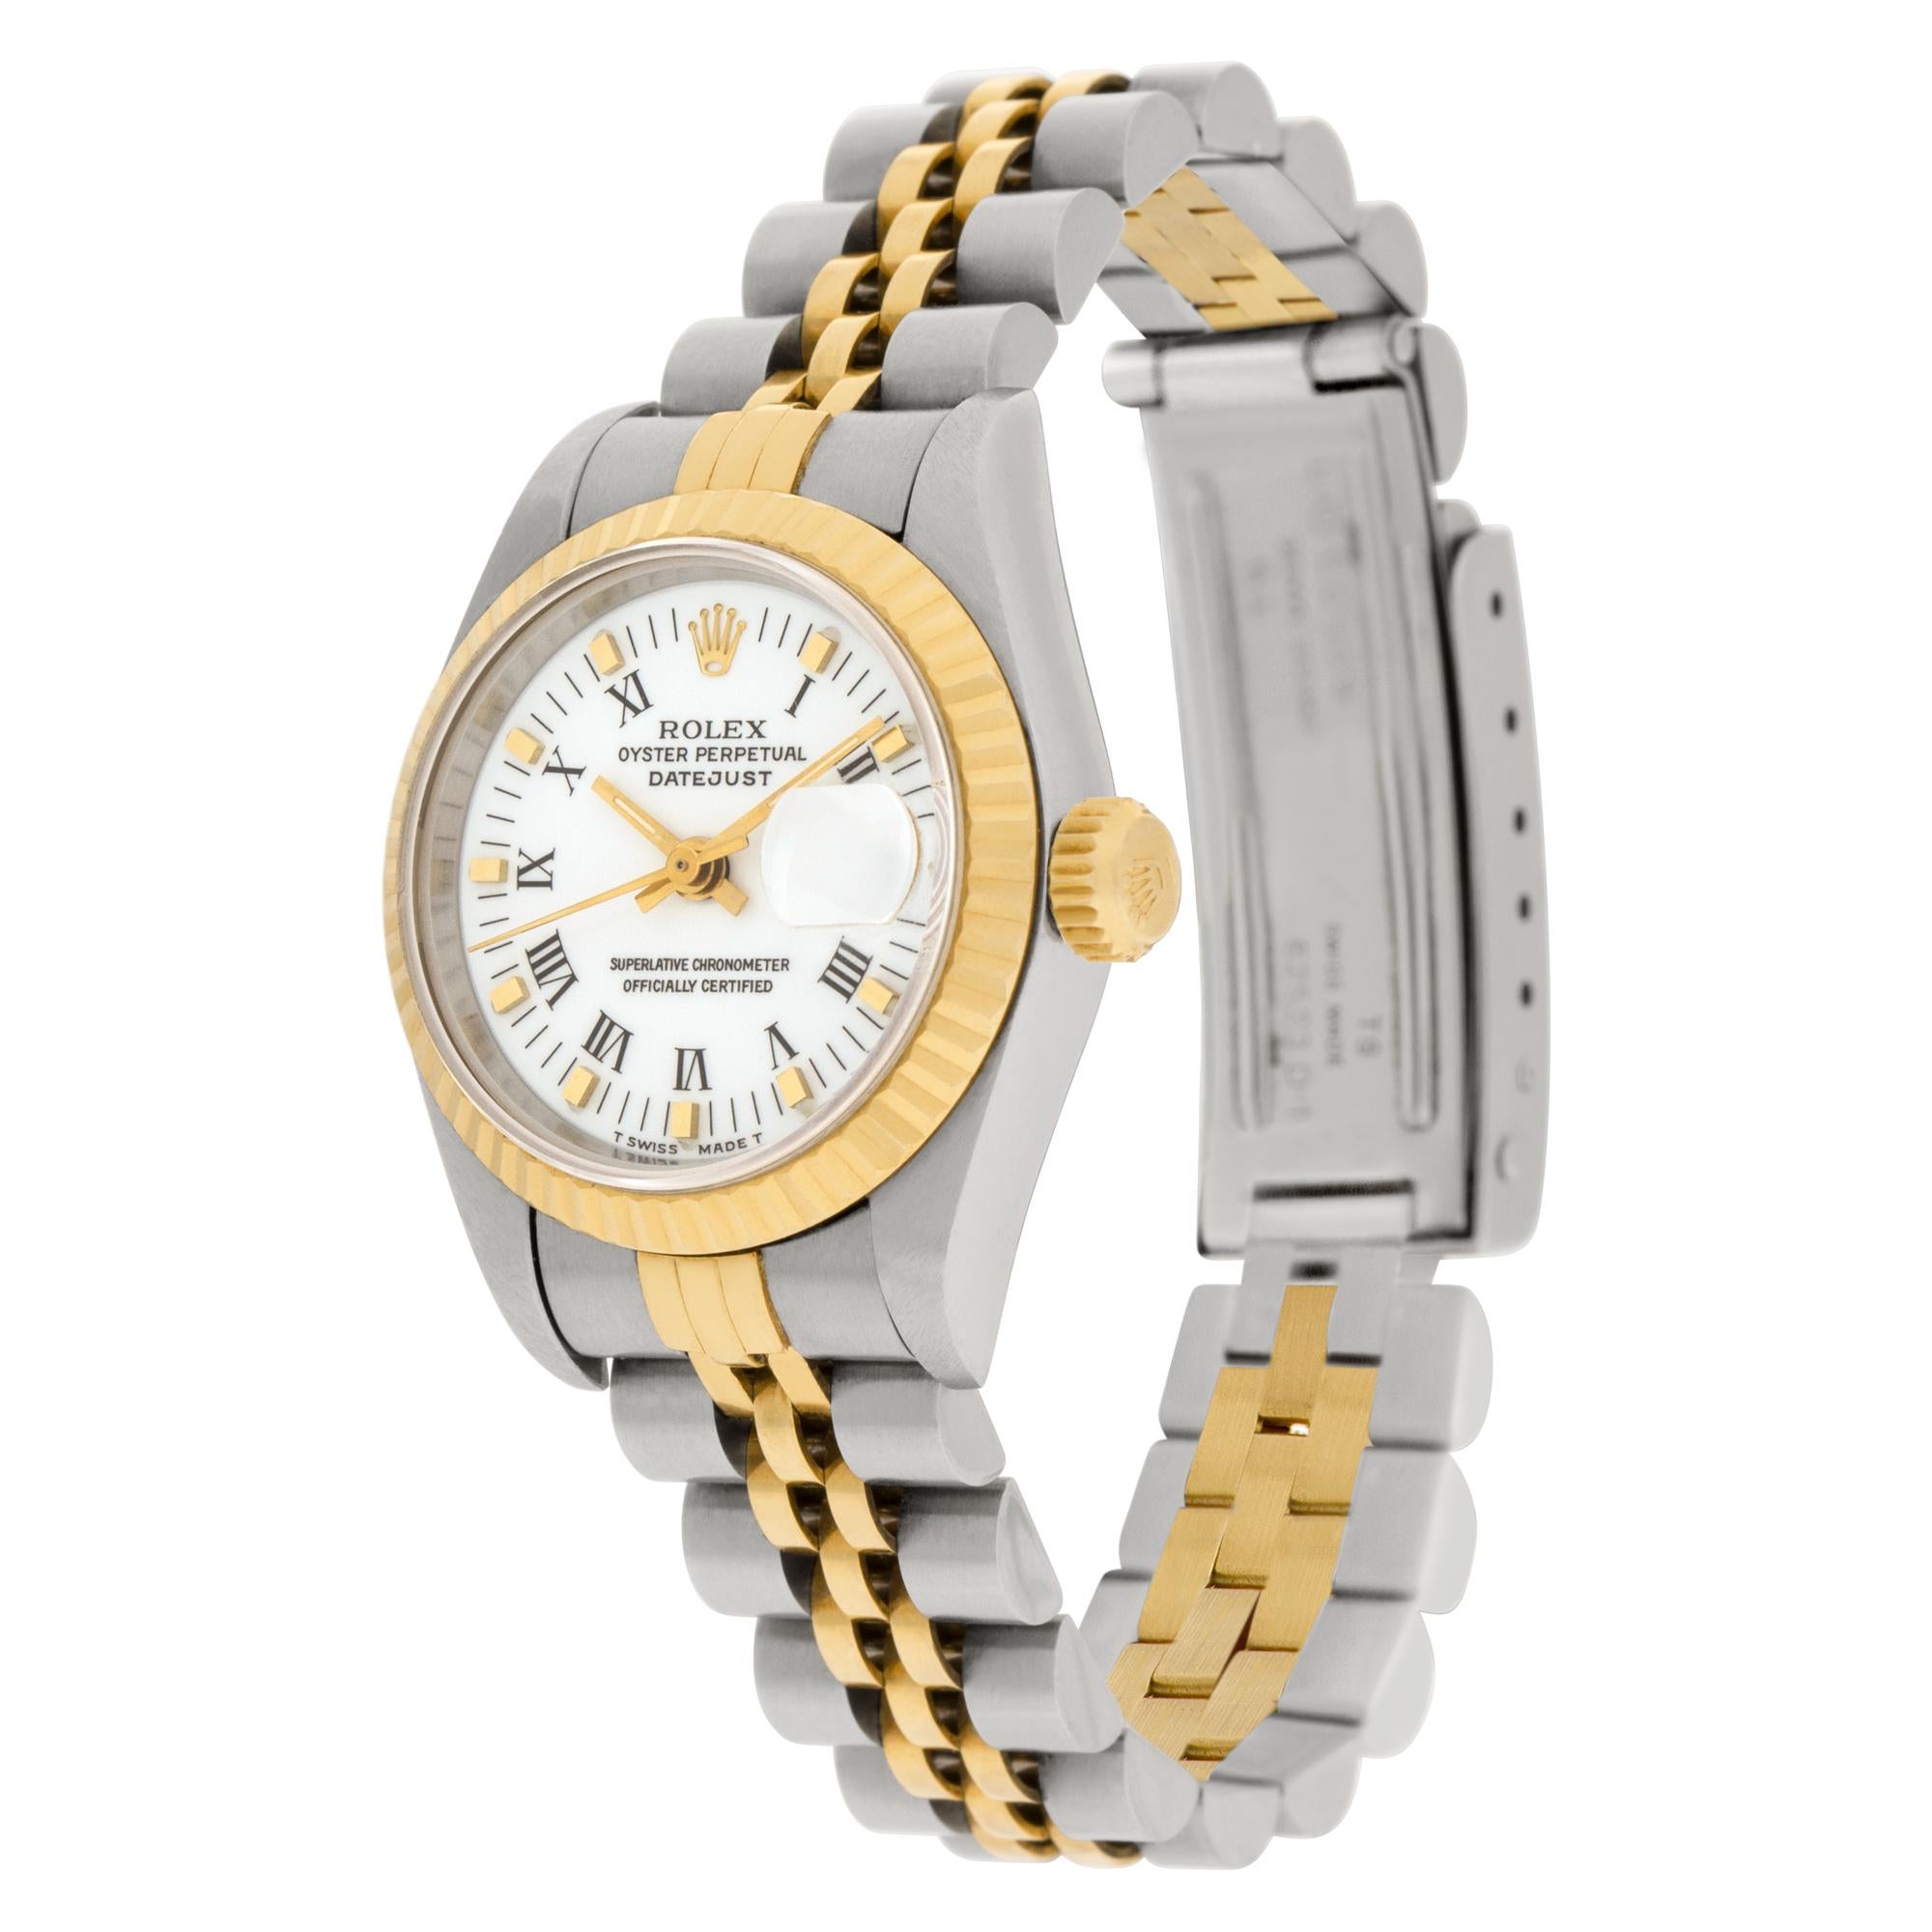 Rolex Datejust in 18k & stainless steel. Auto w/ sweep seconds and date. 26 mm case size. Circa 1993. Ref 69173. Fine Pre-owned Rolex Watch.

Certified preowned Classic Rolex Datejust 69173 watch is made out of Gold and steel on a 18k & Stainless